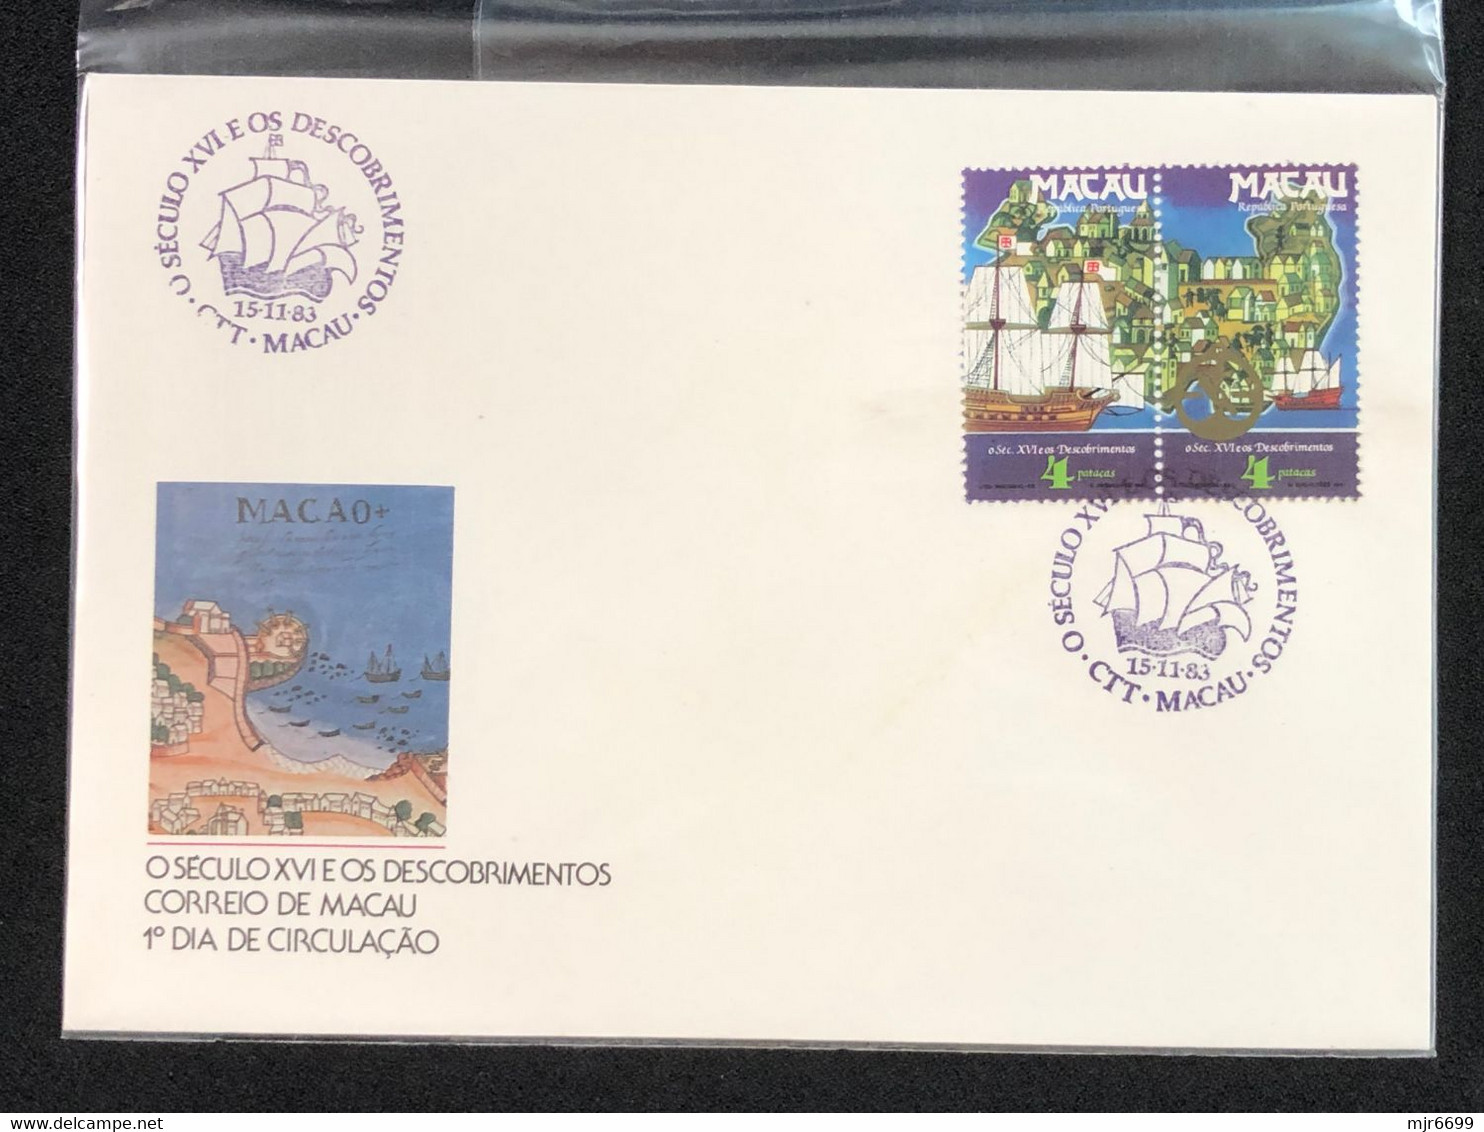 MACAU 1983 ON THE 16TH CENTURY AND THE DISCOVERIES FDC - FDC